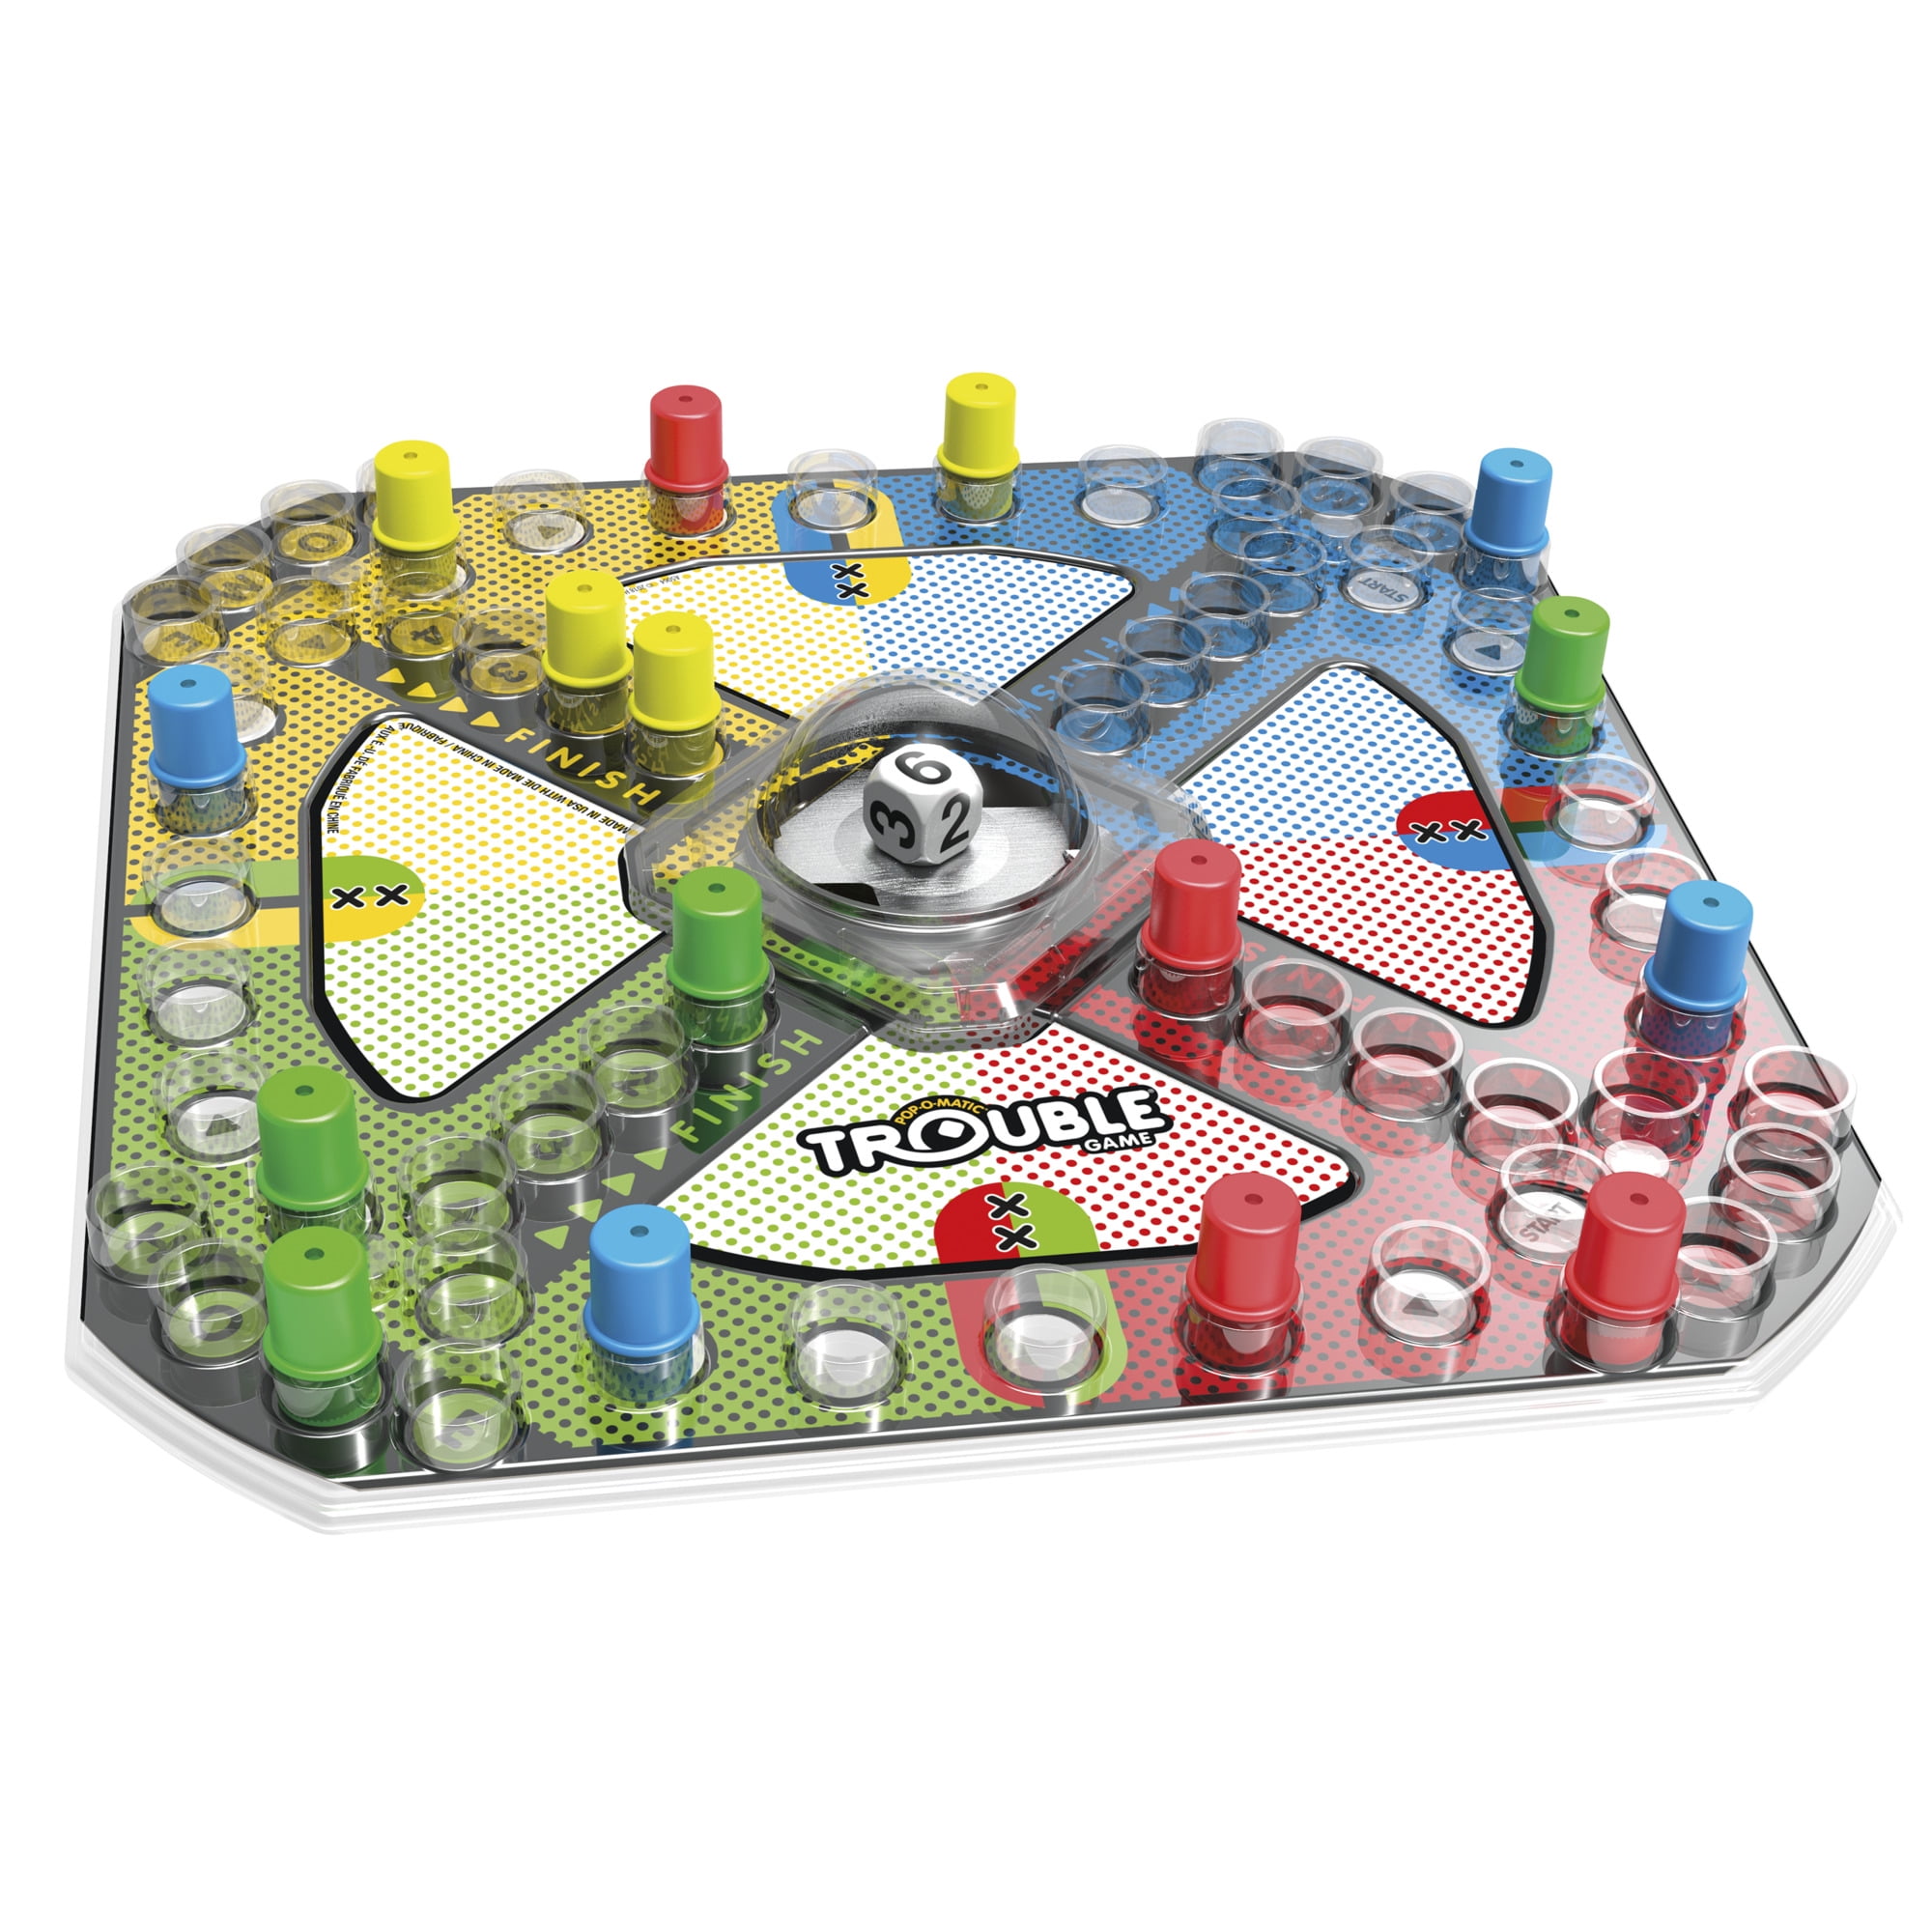 2-4 Players A5064 TOY NEW Trouble Board Game for Kids Ages 5 & Up 